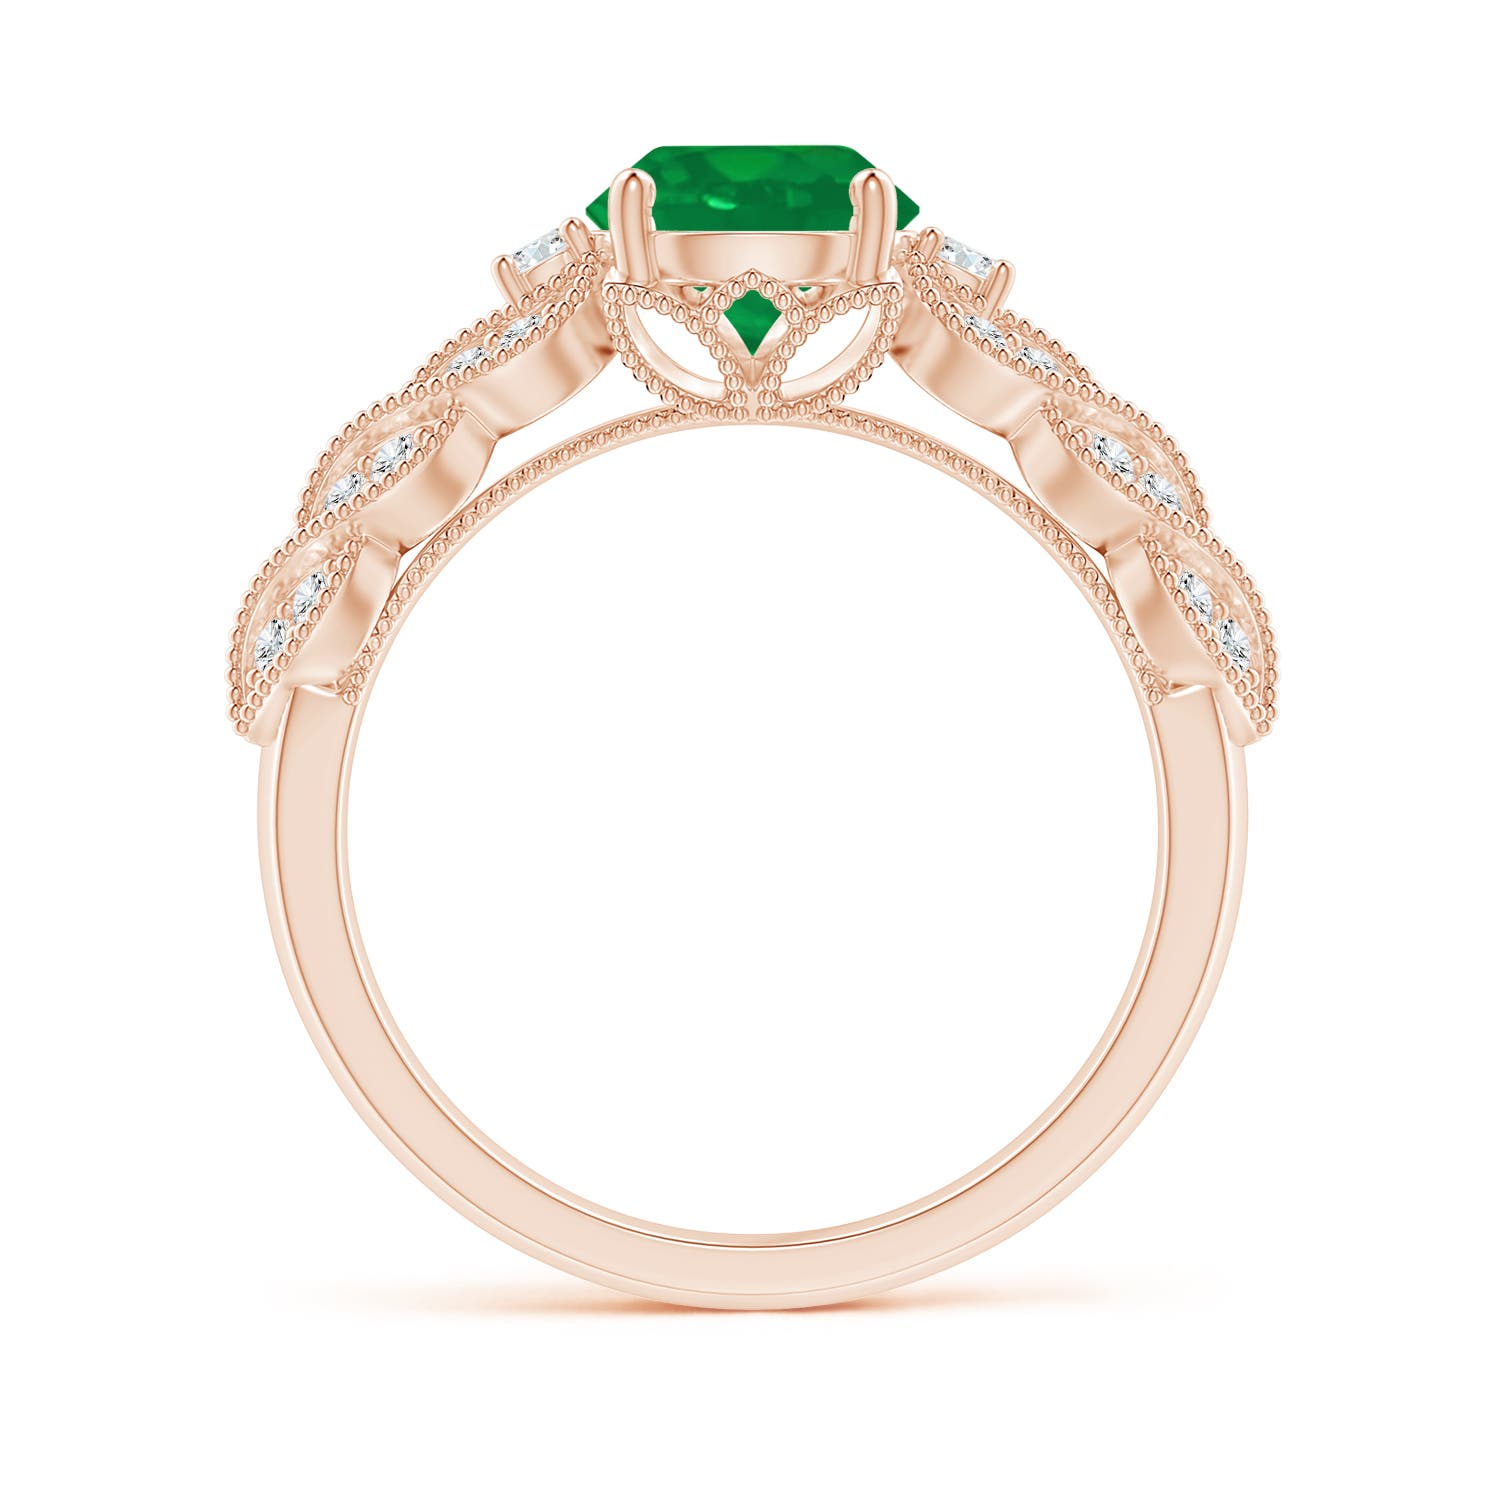 AA - Emerald / 1.47 CT / 14 KT Rose Gold